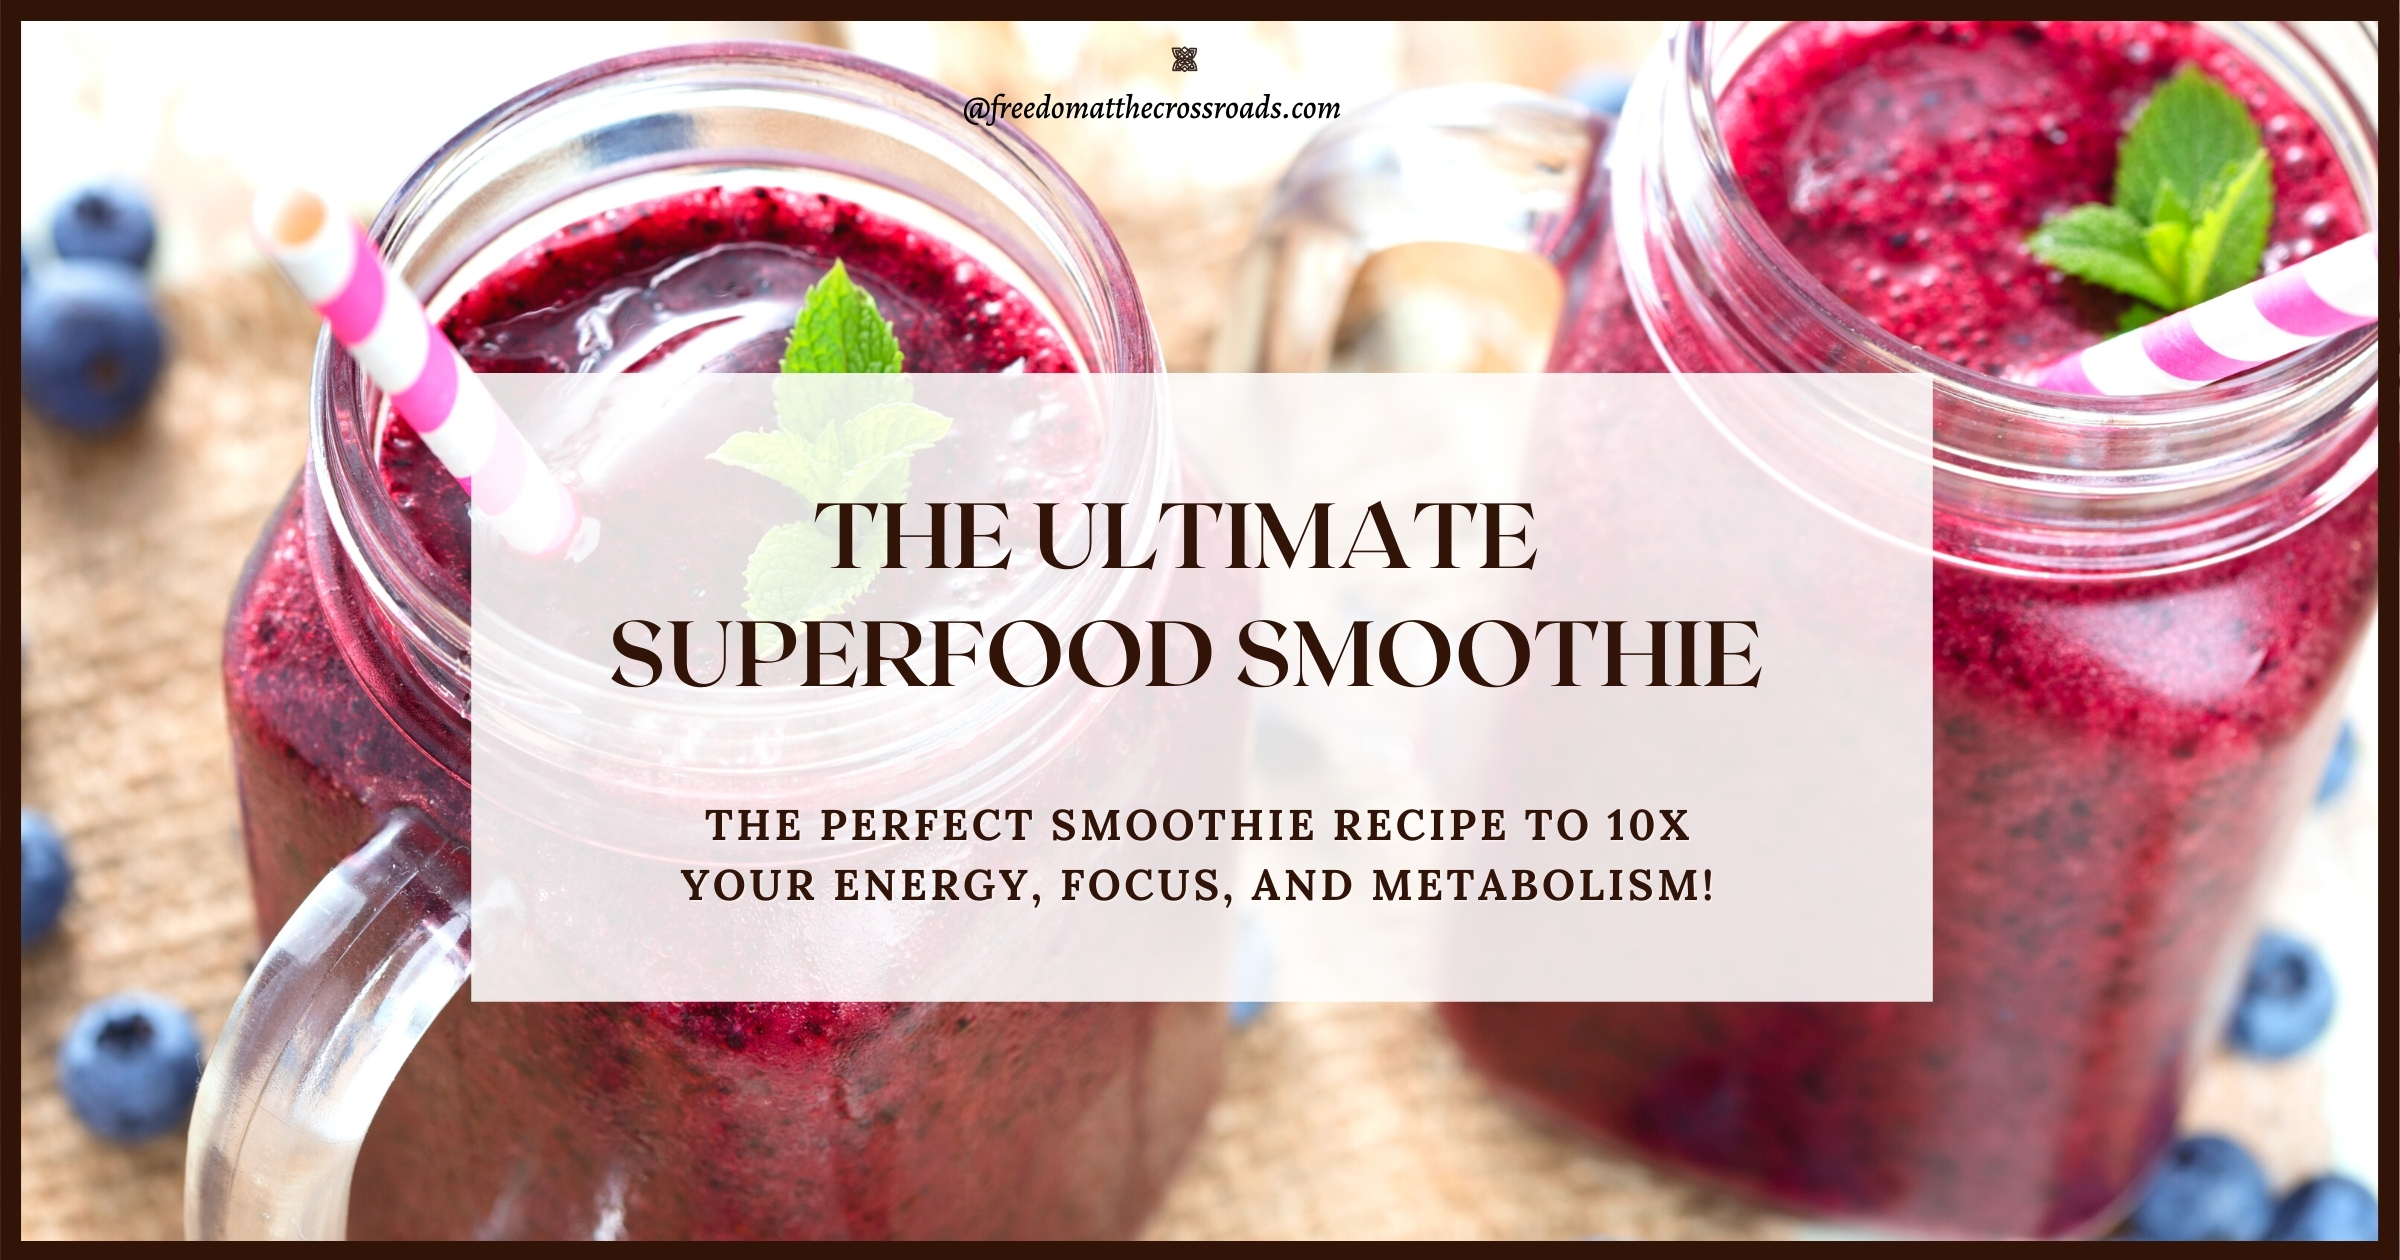 the Ultimate superfood smoothie blog feature image